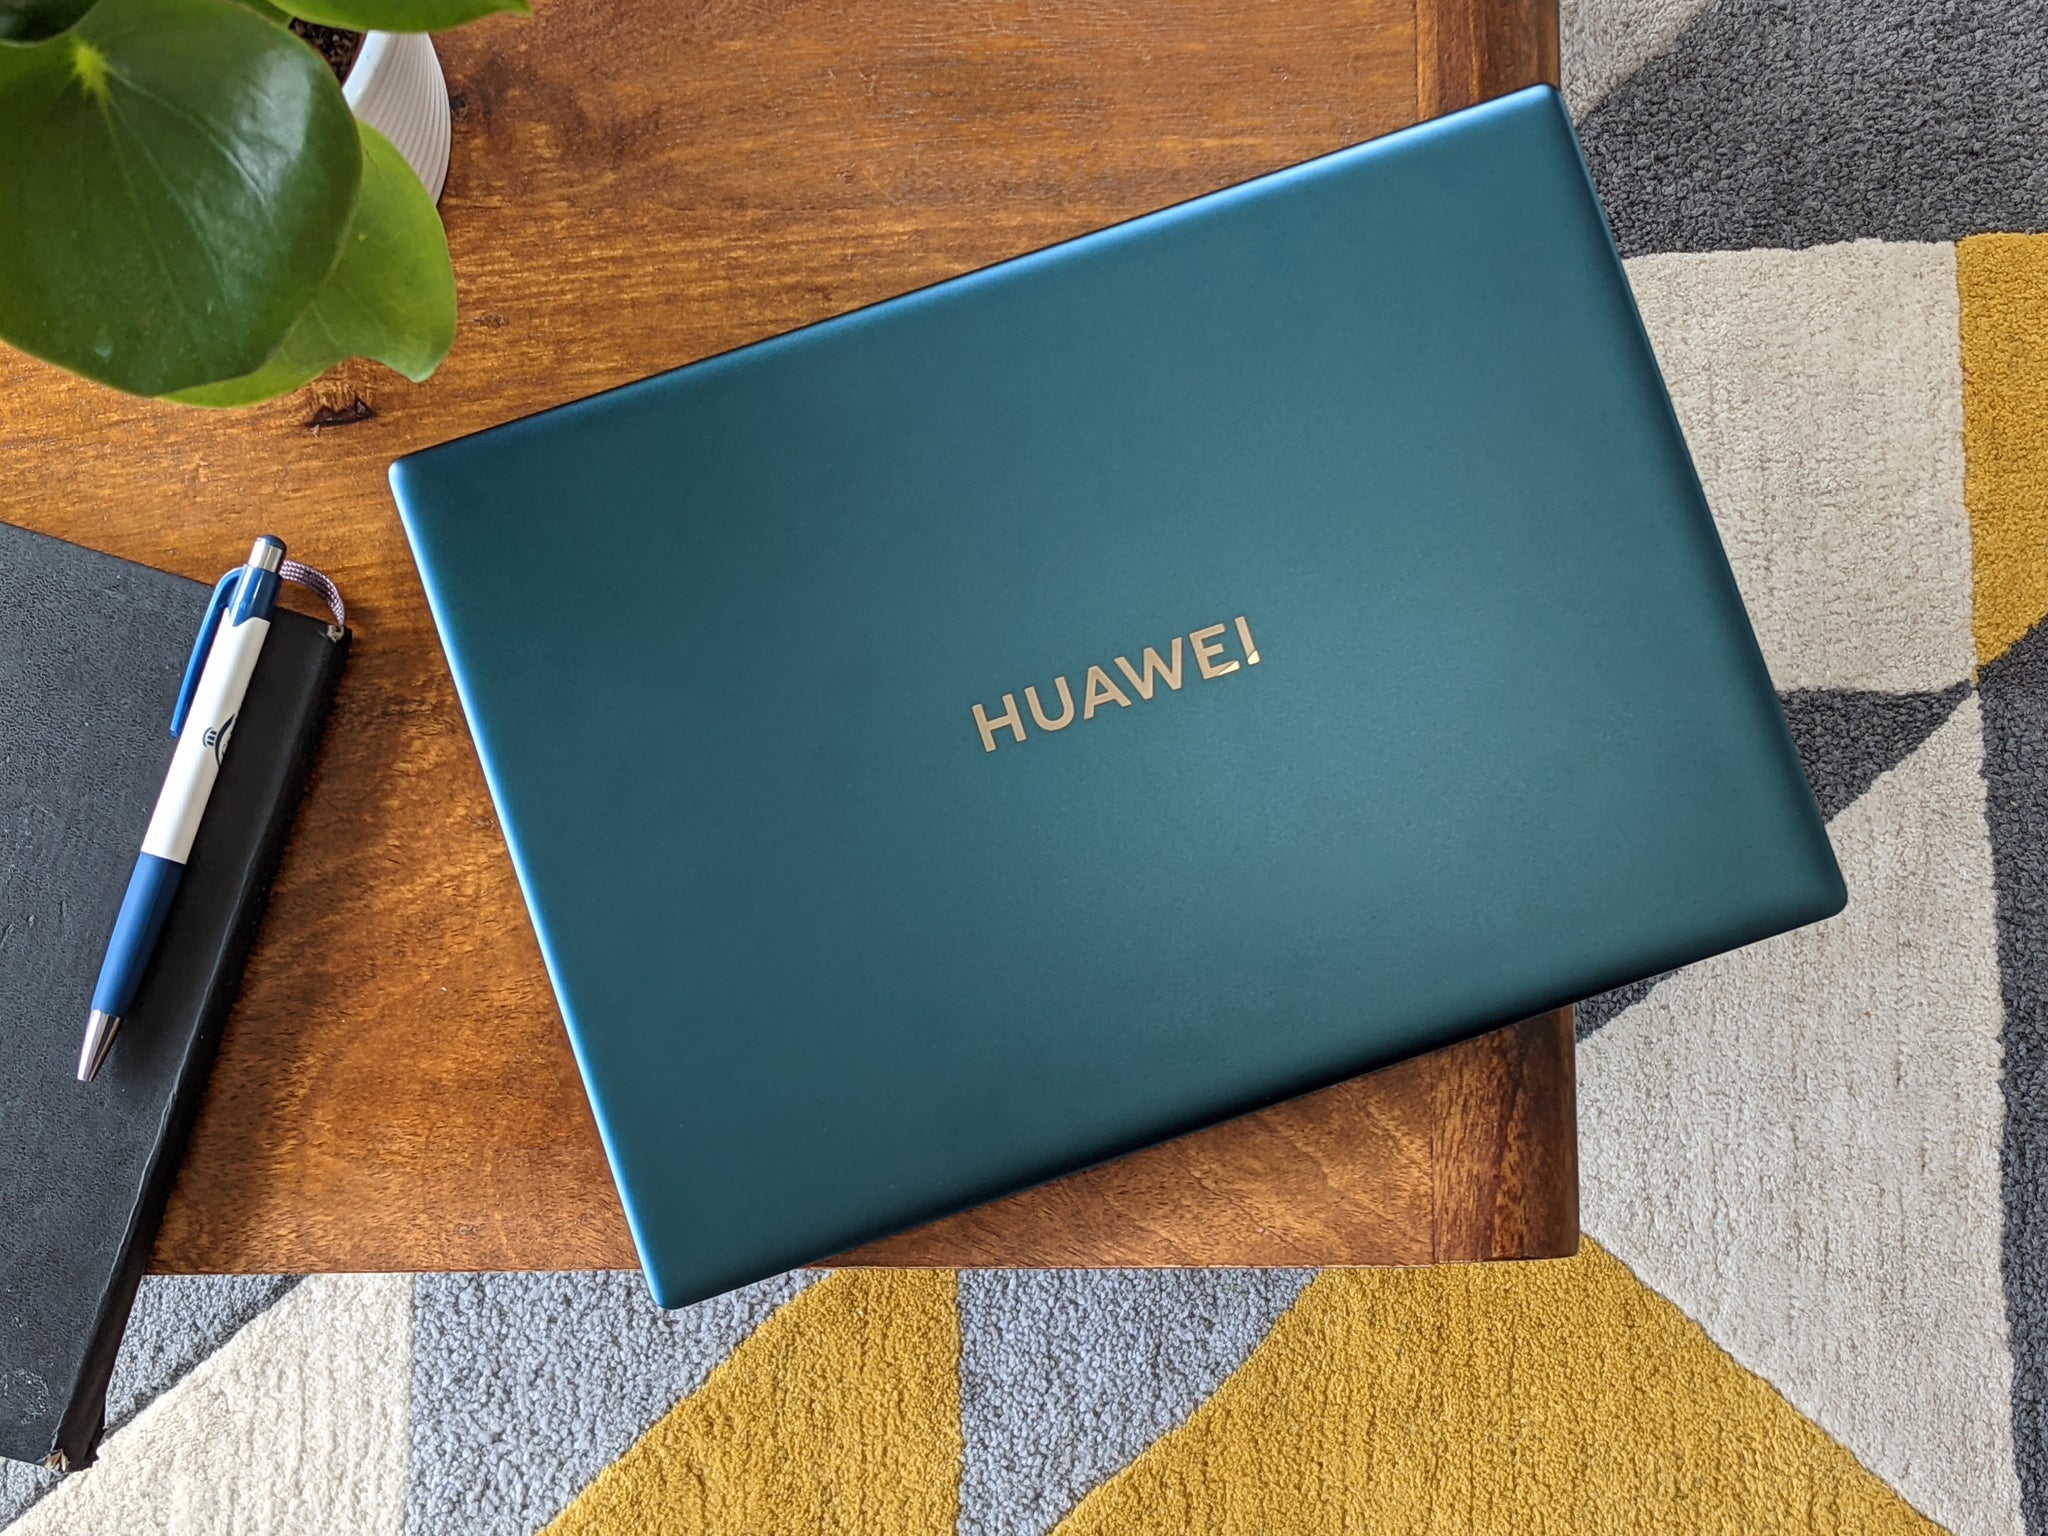 The Huawei matebook X pro in emerald green is simply gorgeous